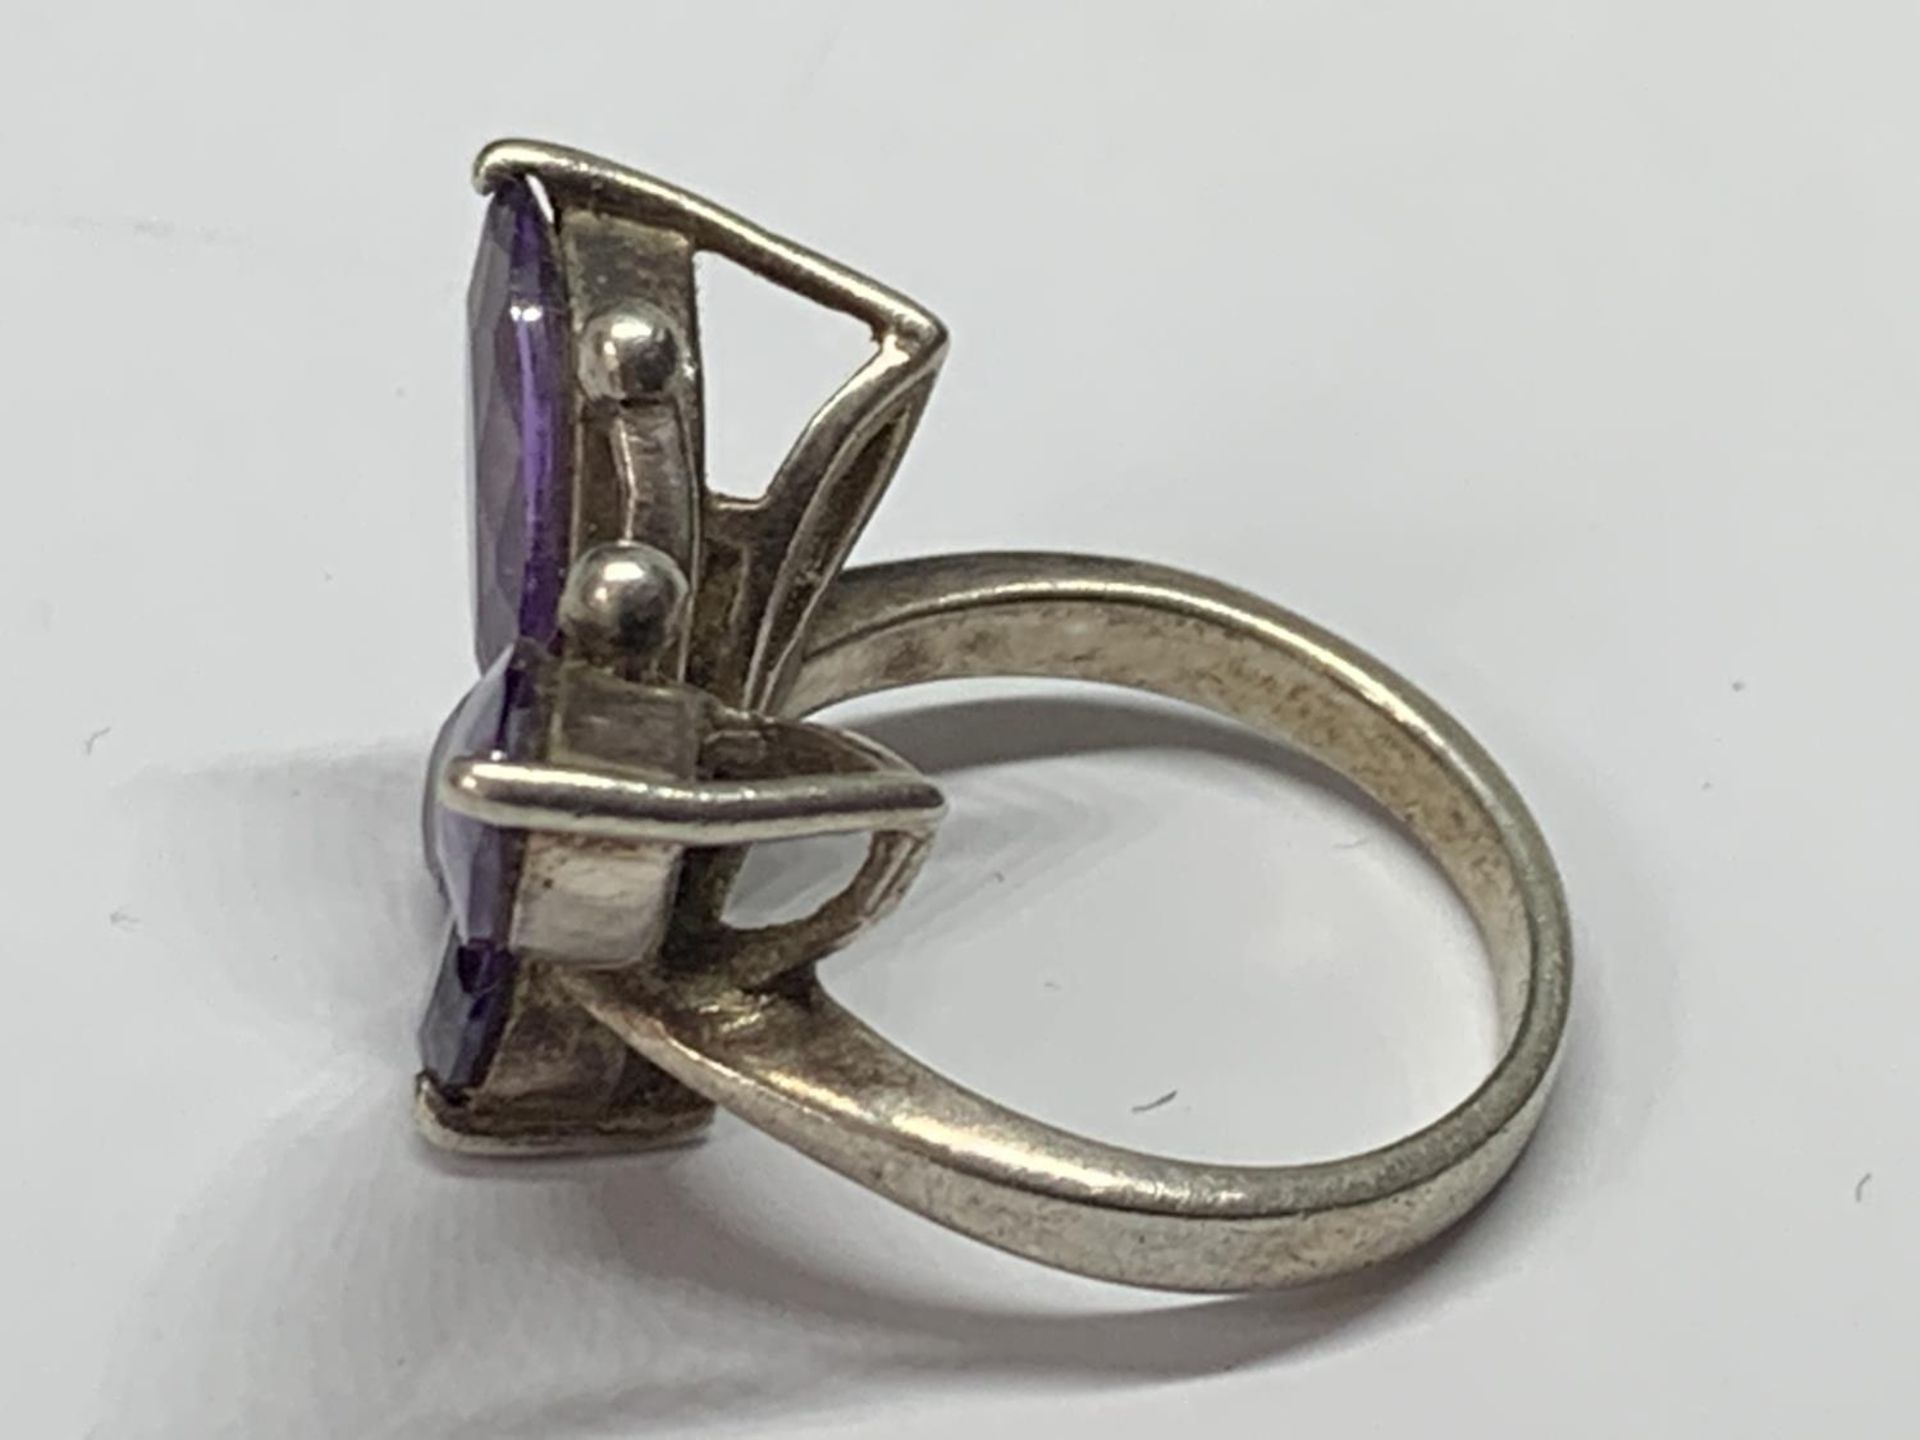 A SILVER RING WITH PURPLE STONES IN A BUTTERFLY DESIGN SIZE M IN A PRESENTATION BOX - Image 2 of 3